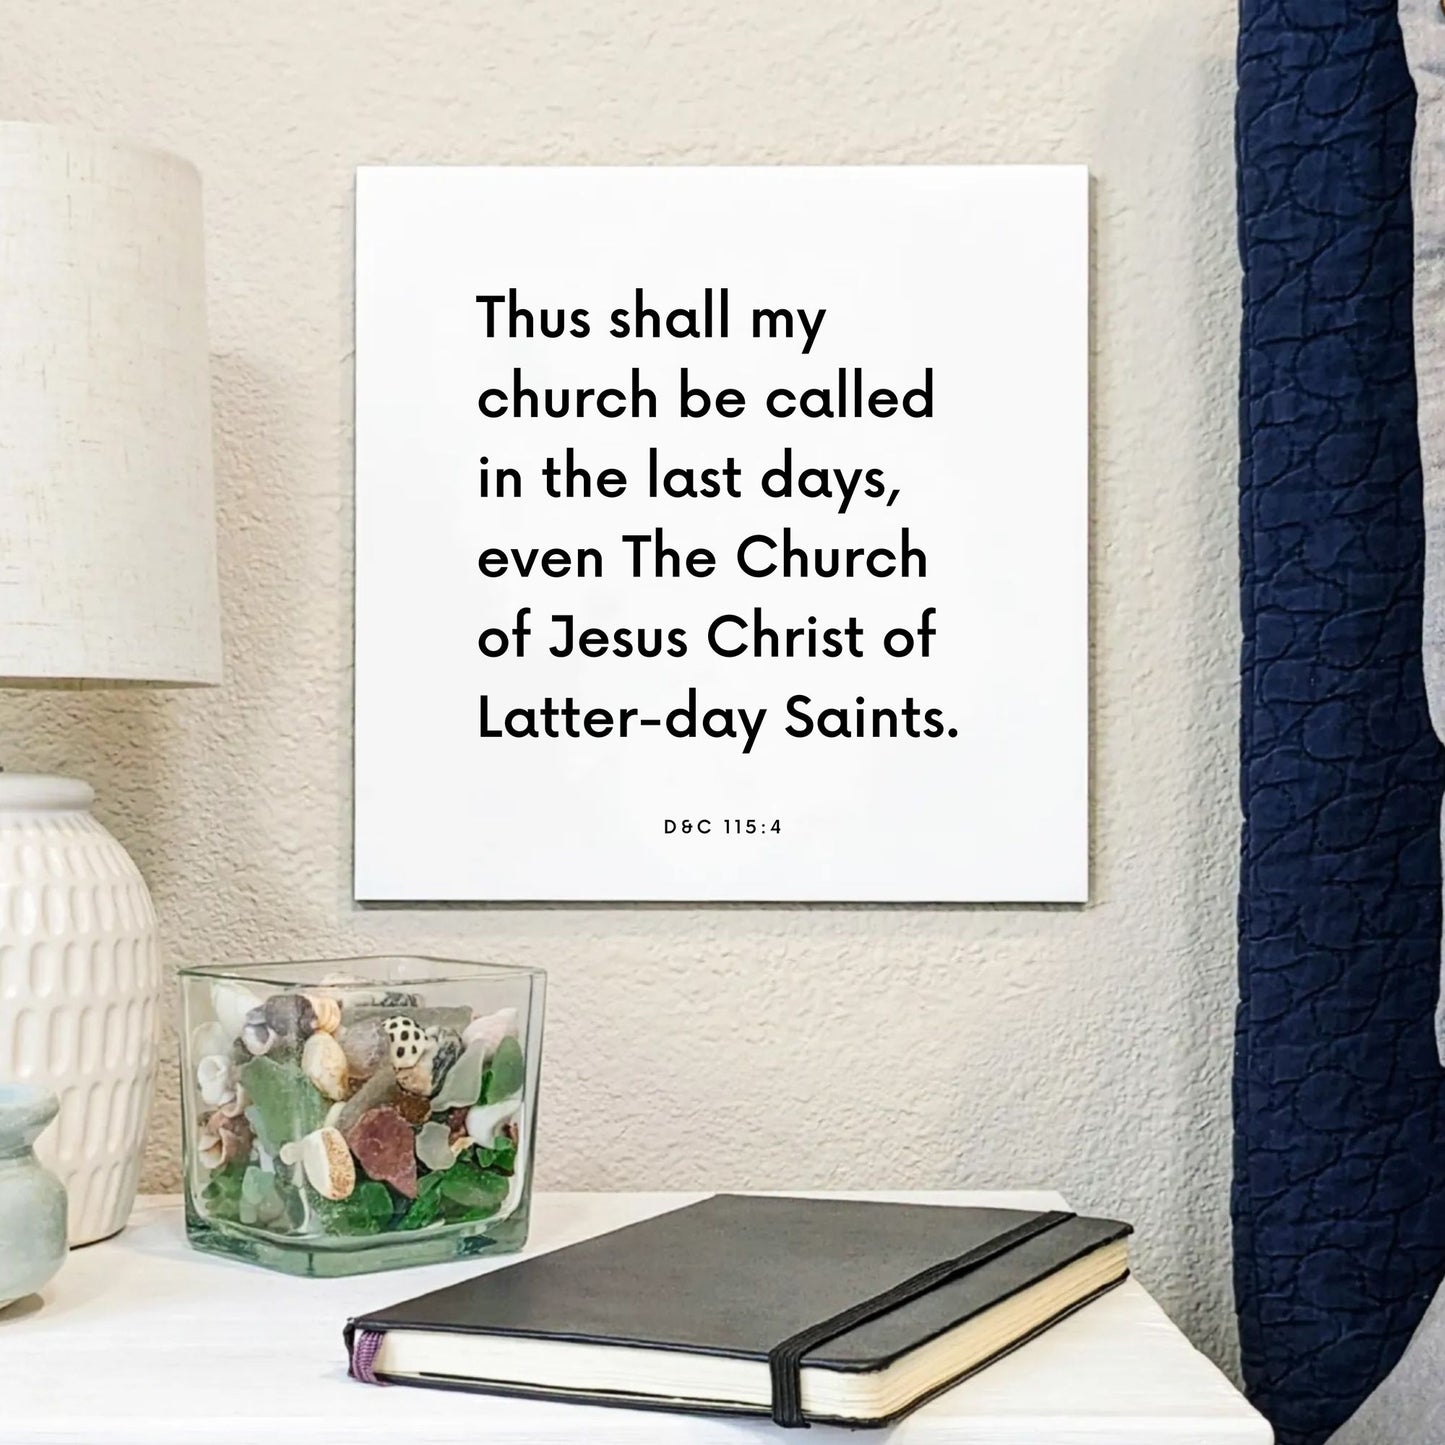 Bedside mouting of the scripture tile for D&C 115:4 - "Thus shall my church be called in the last days"